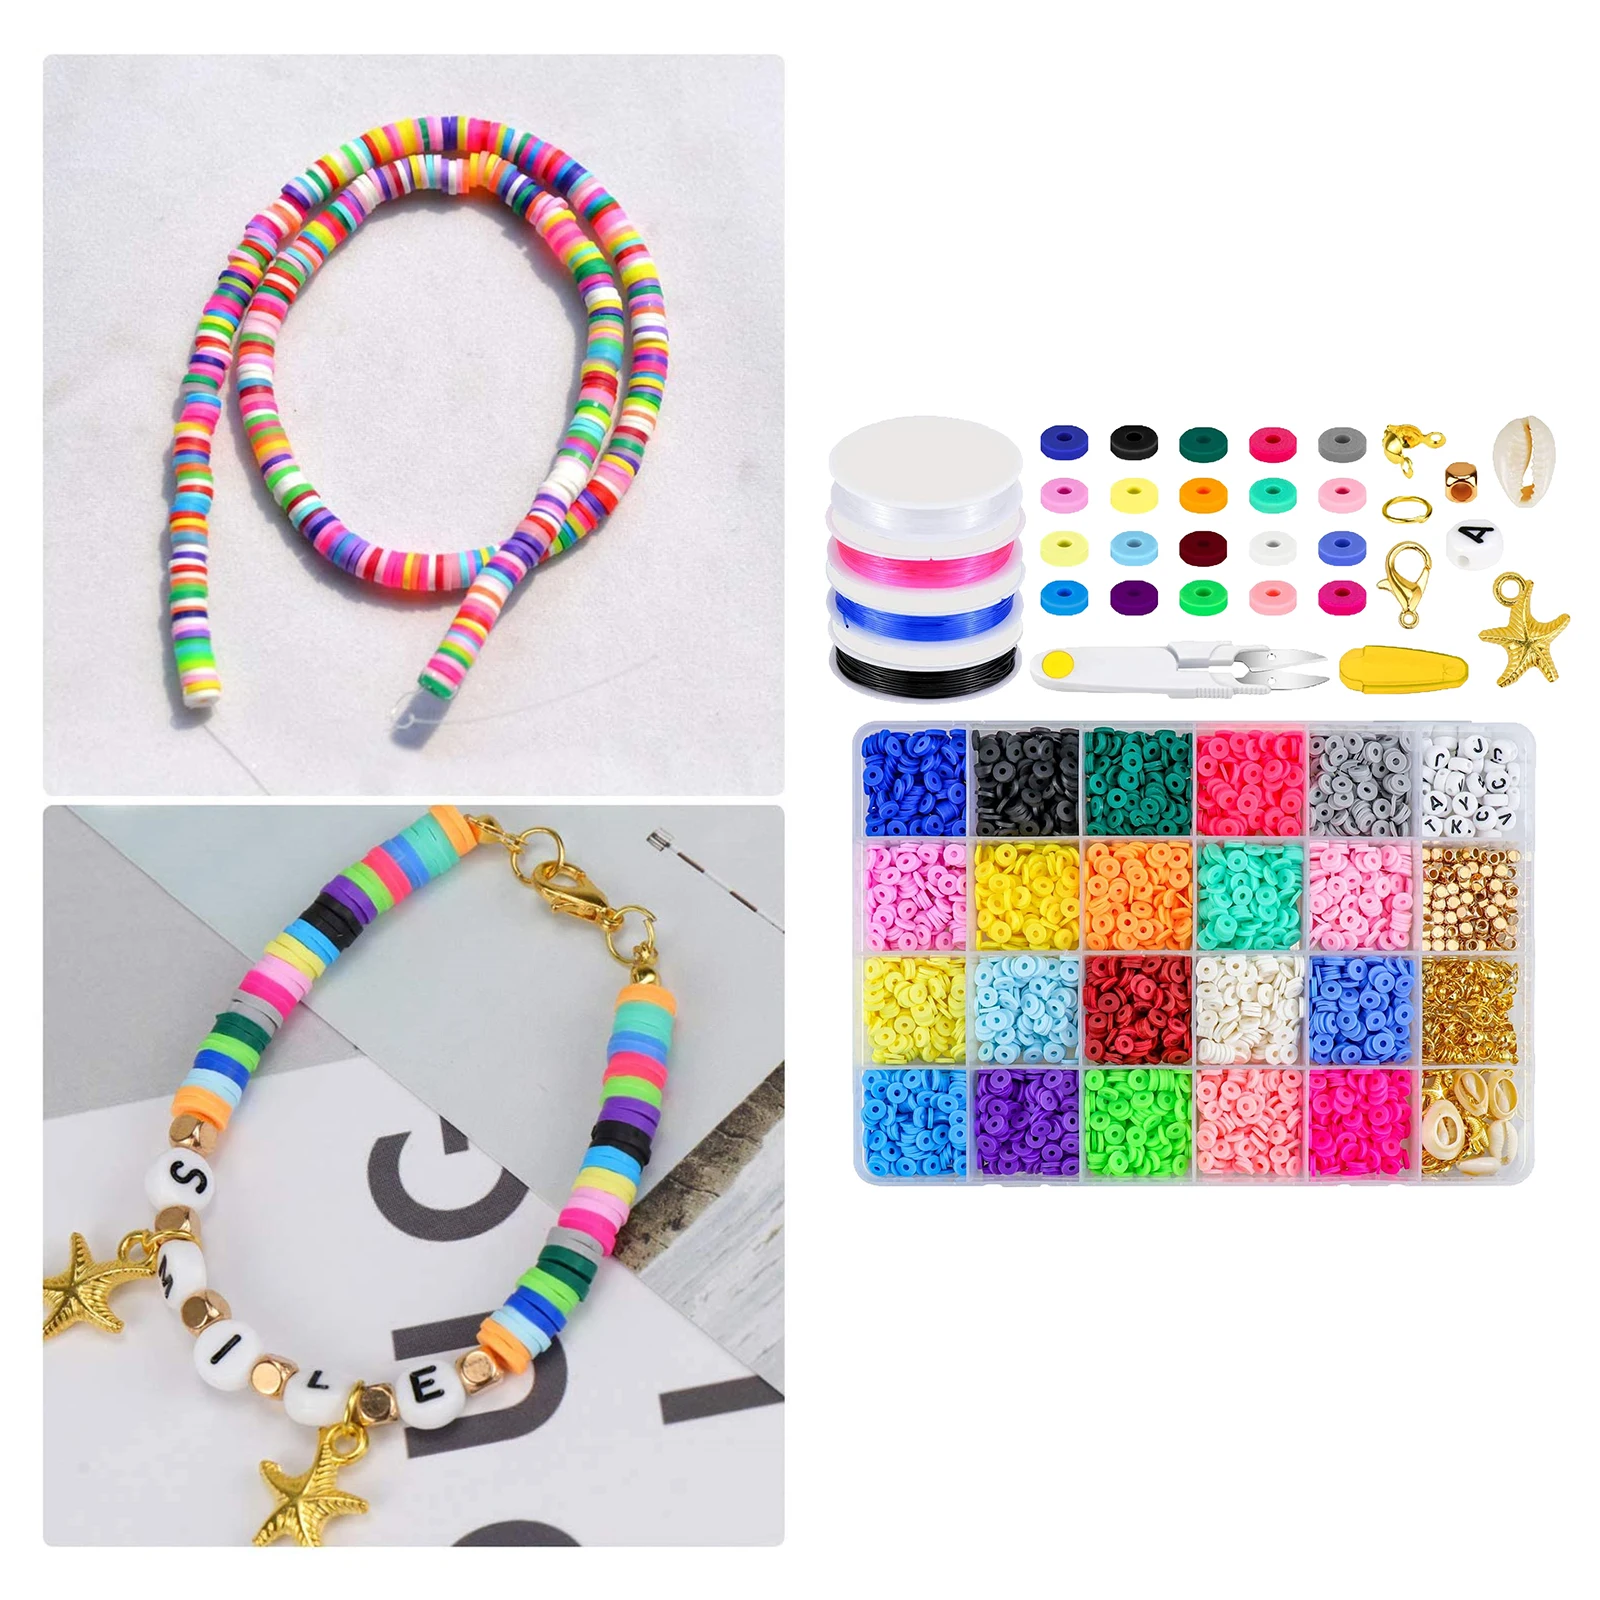 6mm Polymer Clay Beads Spacer DIY Bracelet Jewelry Making Earring Gifts Kit